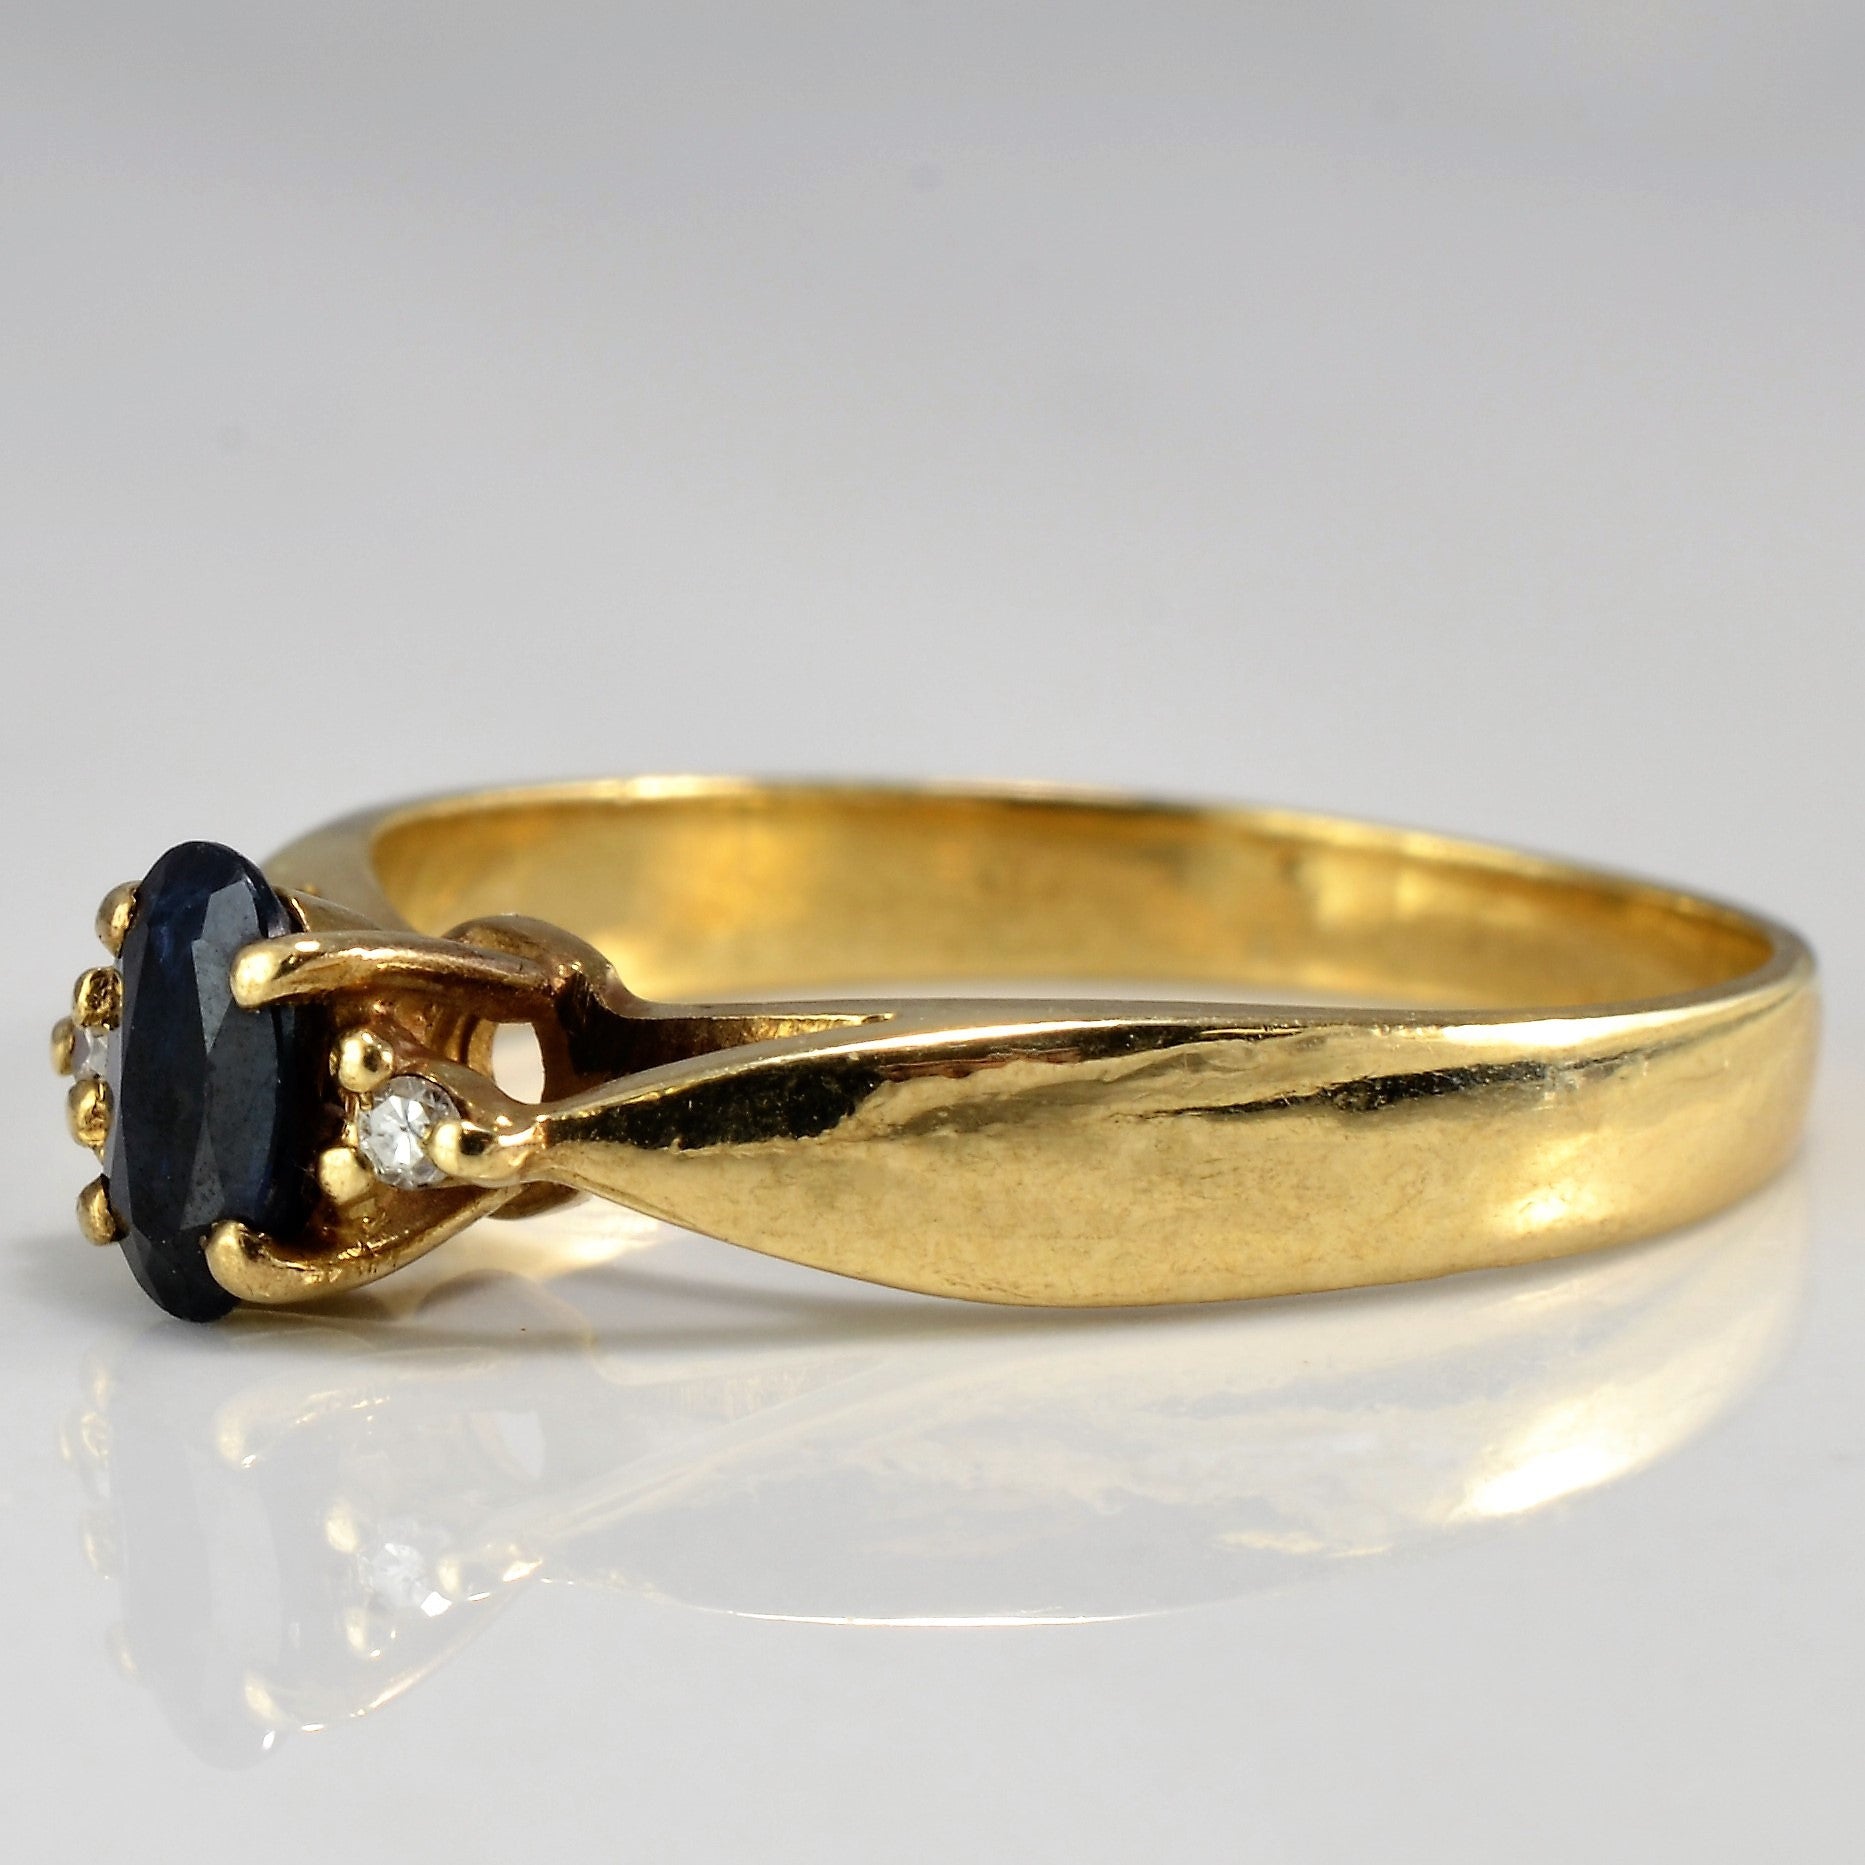 Tapered Oval Cut Sapphire Ring | 0.01 ctw, SZ 5.5 |